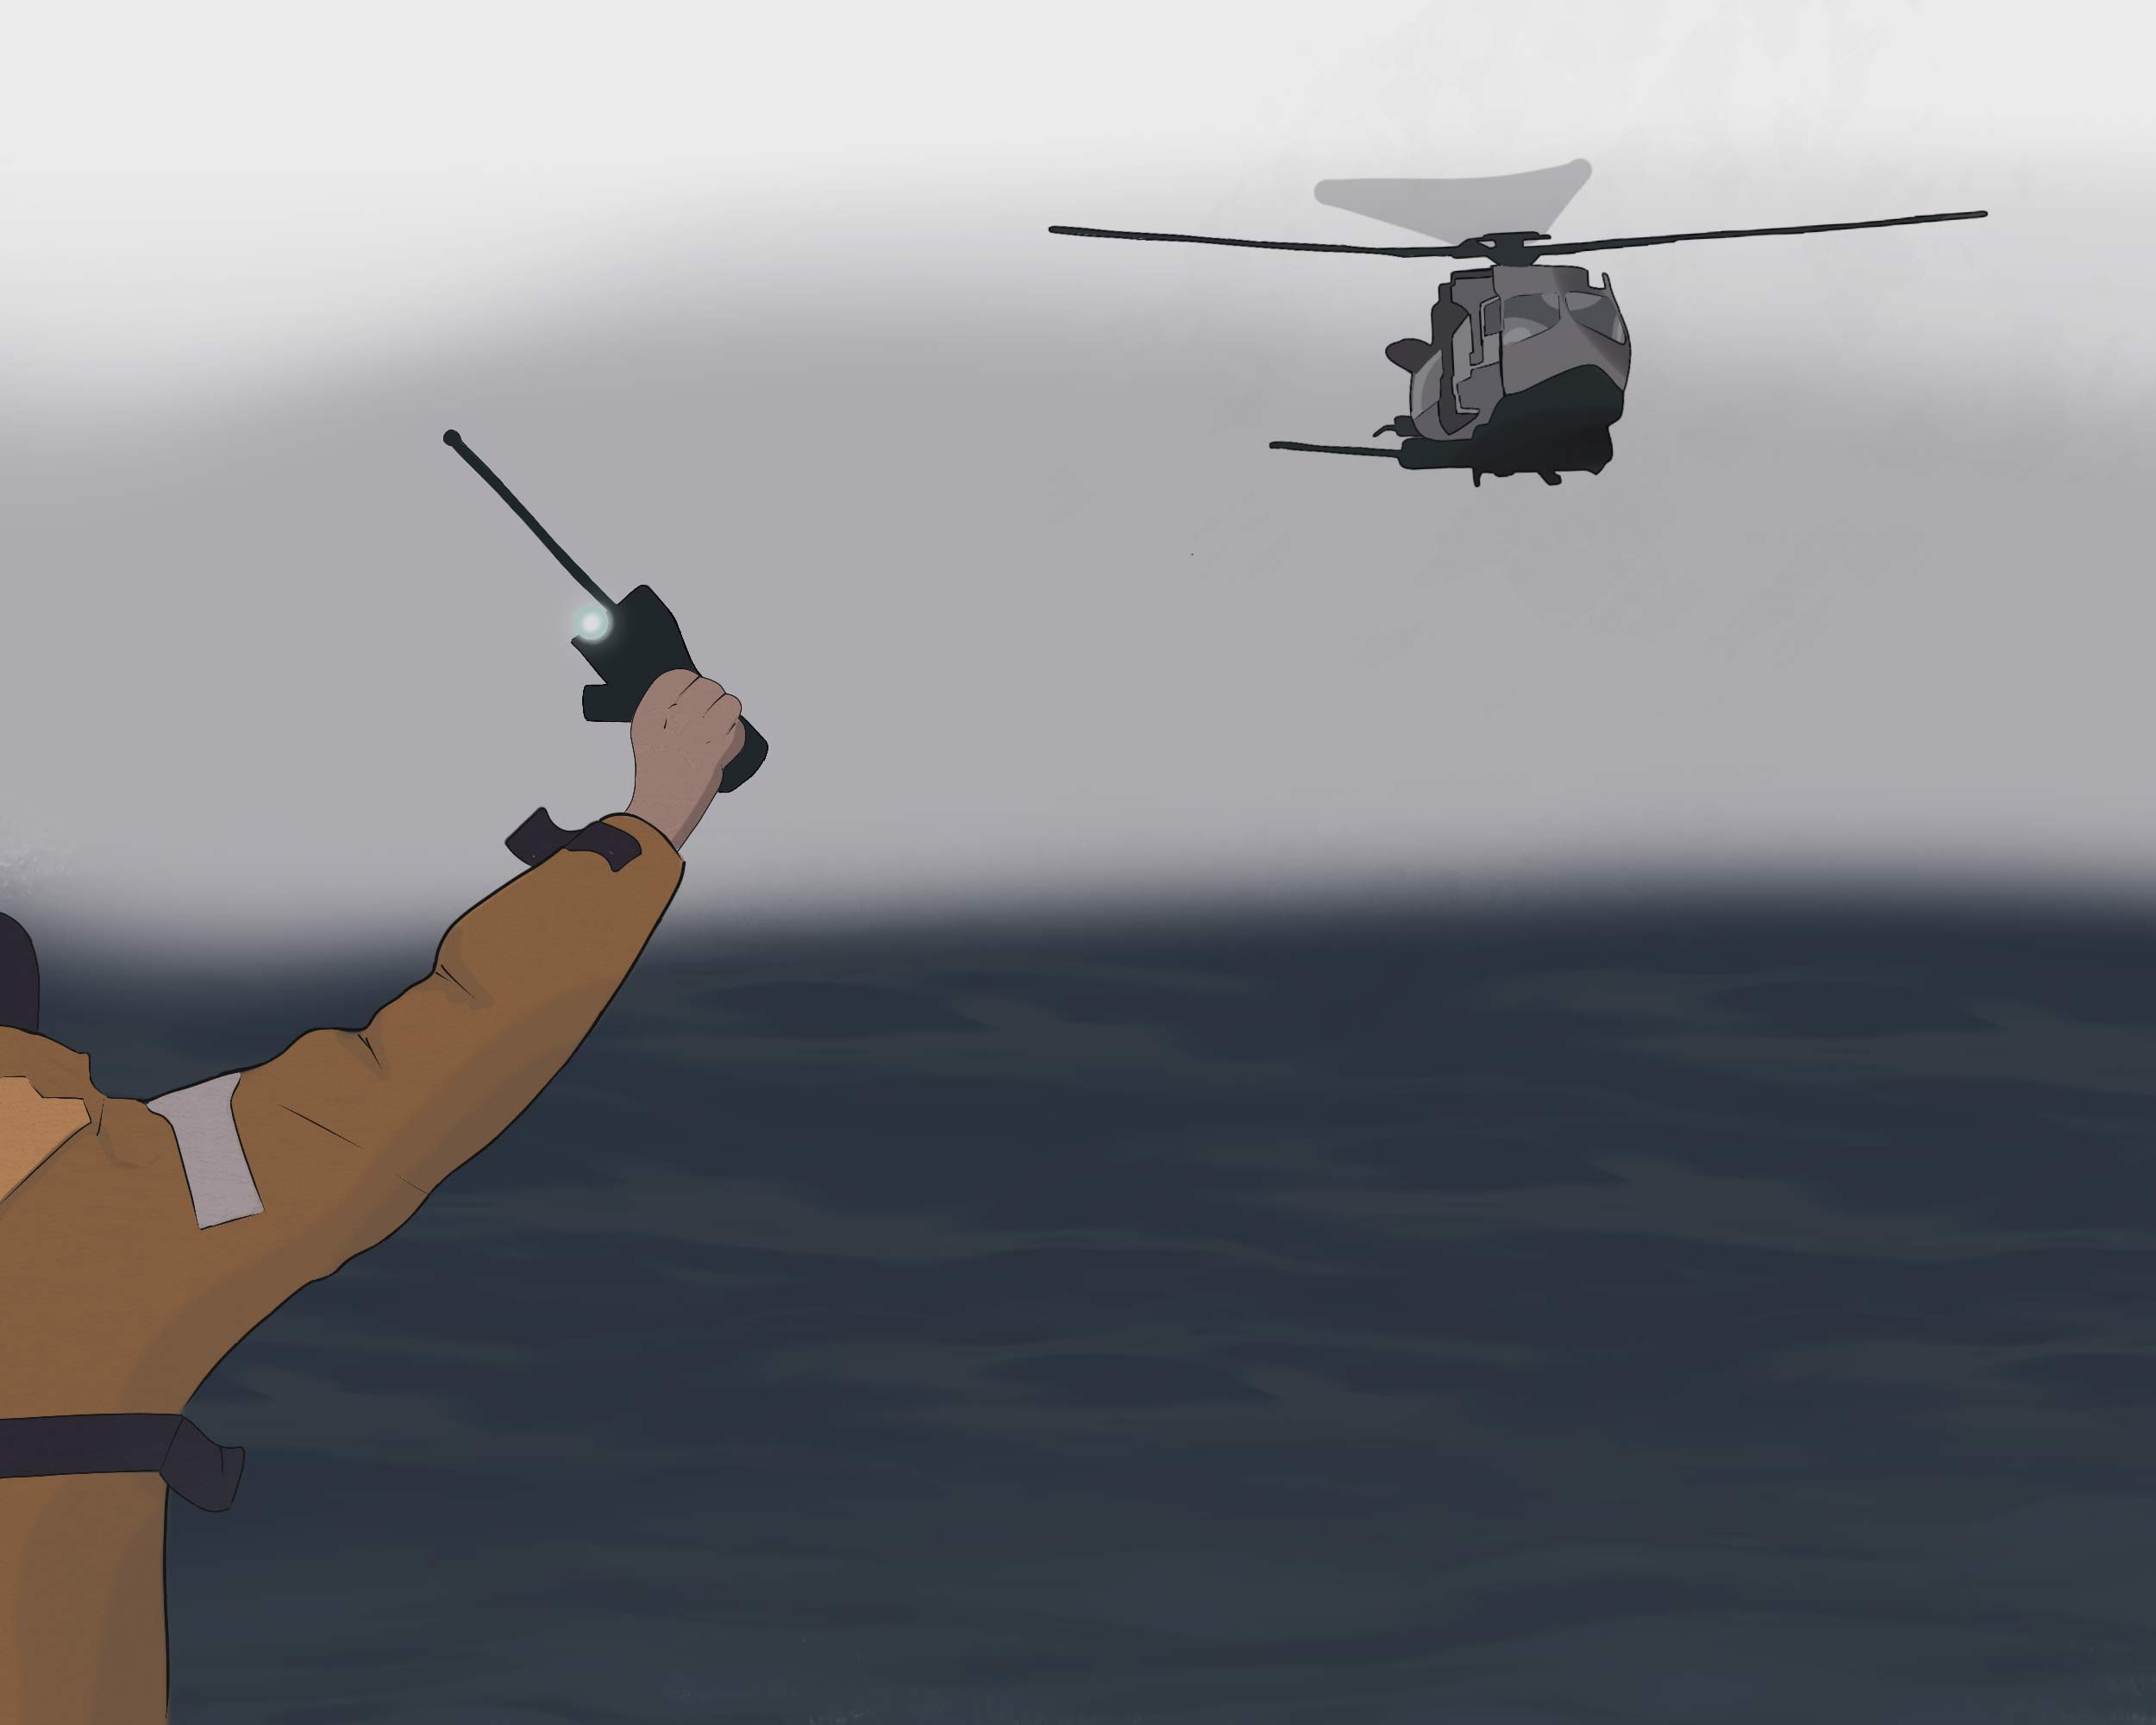 Illustration of helicopter coming to the rescue of person in foreground with transponder.